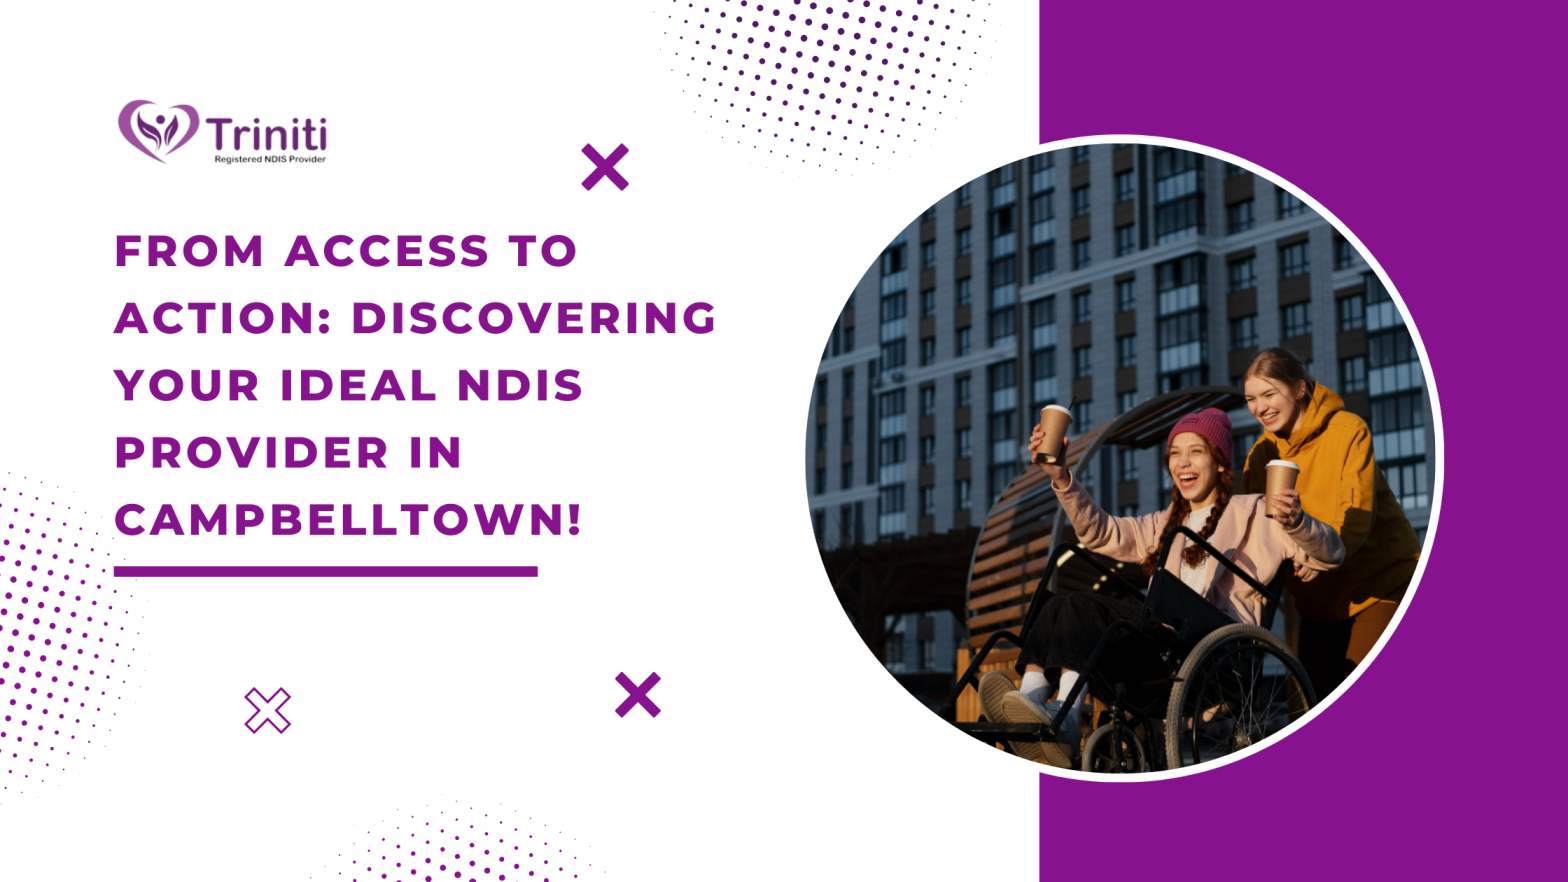 From Access to Action: Discovering Your Ideal NDIS Provider in Campbelltown!